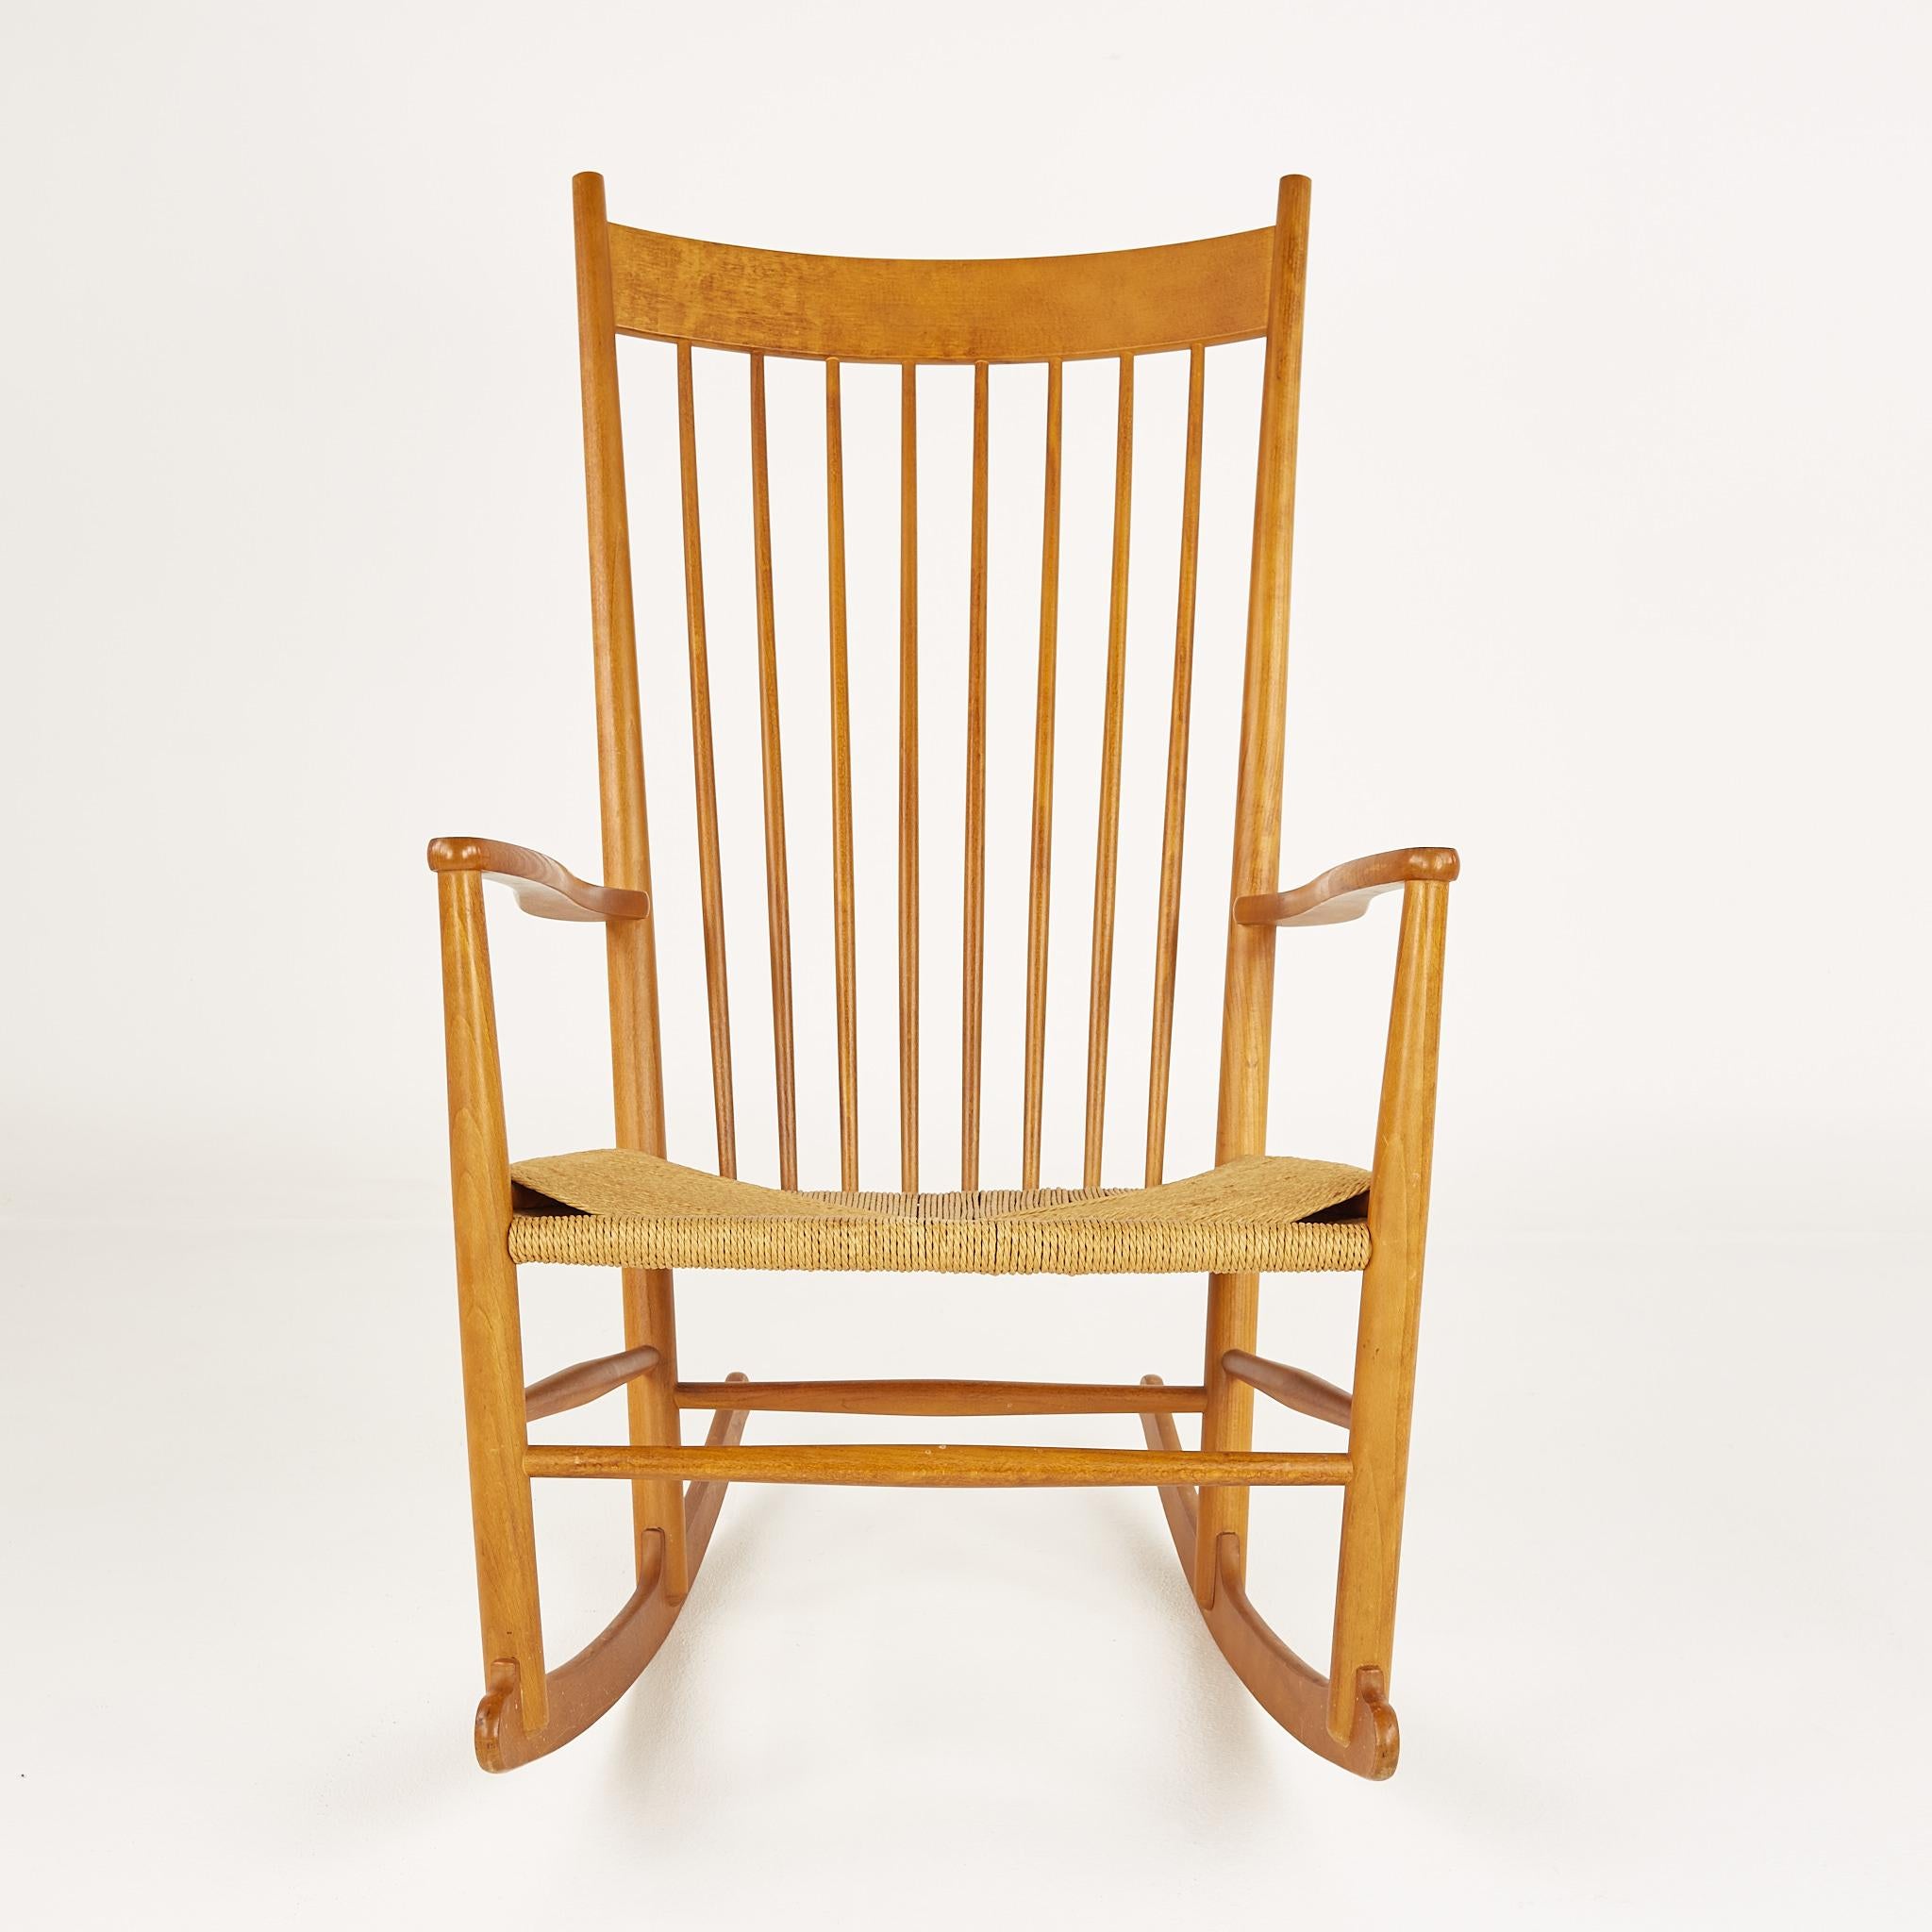 Hans Wegner mid century rocking chair

This chair measures: 25 wide x 34.5 deep x 41.25 inches high, with a seat height of 18 and arm height of 26.25 inches

?All pieces of furniture can be had in what we call restored vintage condition. That